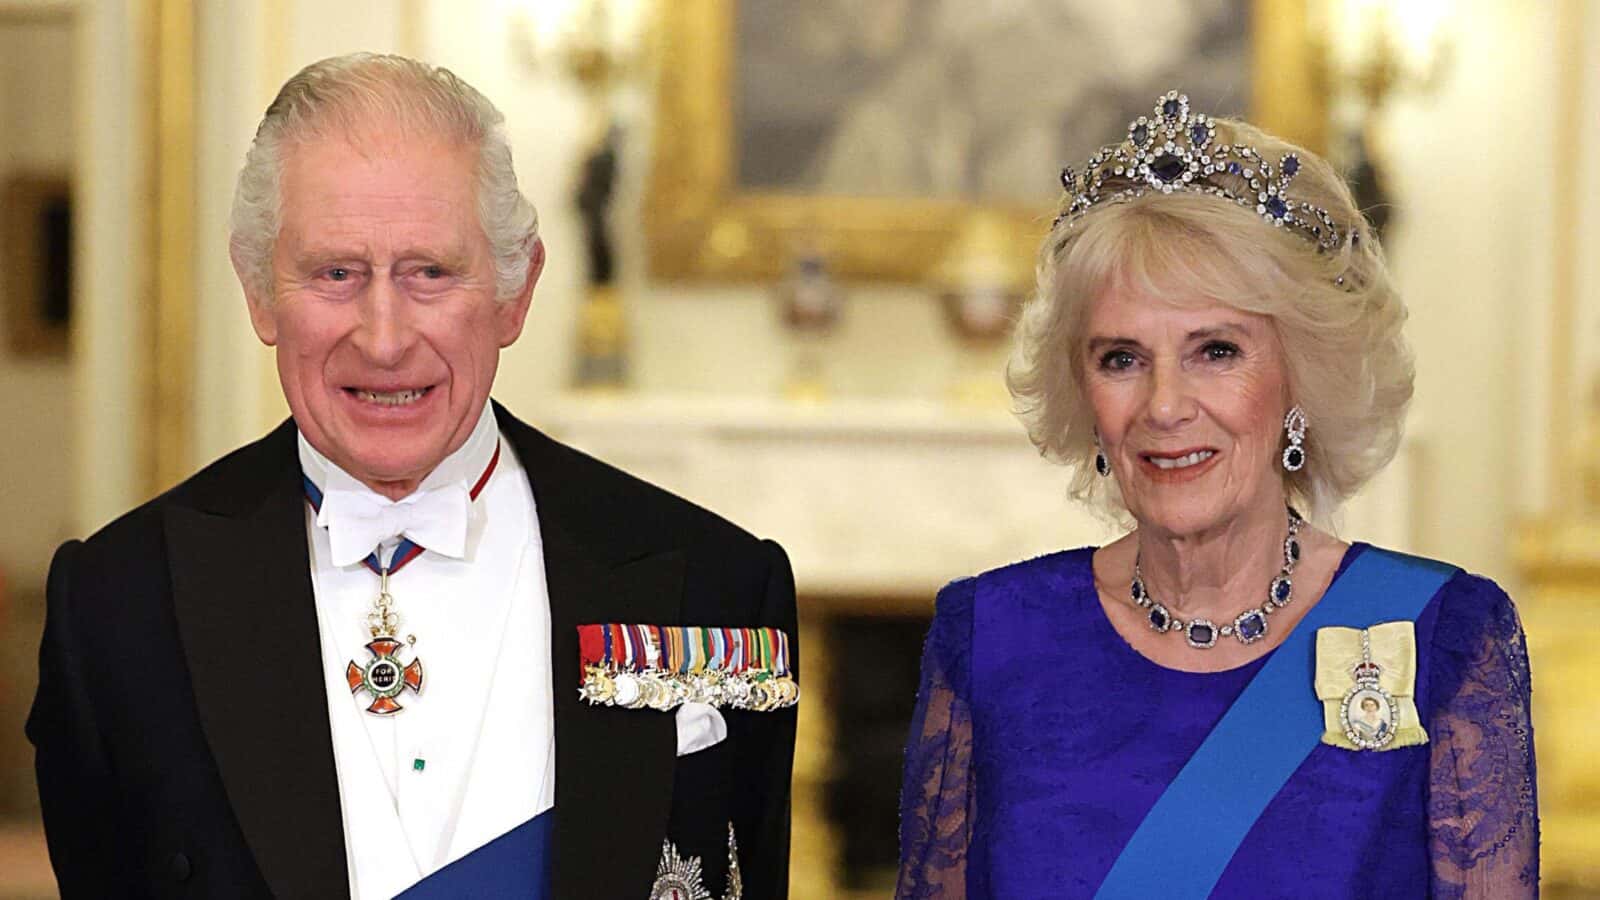 king charles iii and the queen consort during the state banquet held at buckingham palace in london, during the state visit to the uk by president cyril ramaphosa of south africa. picture date: tuesday november 22, 2022.